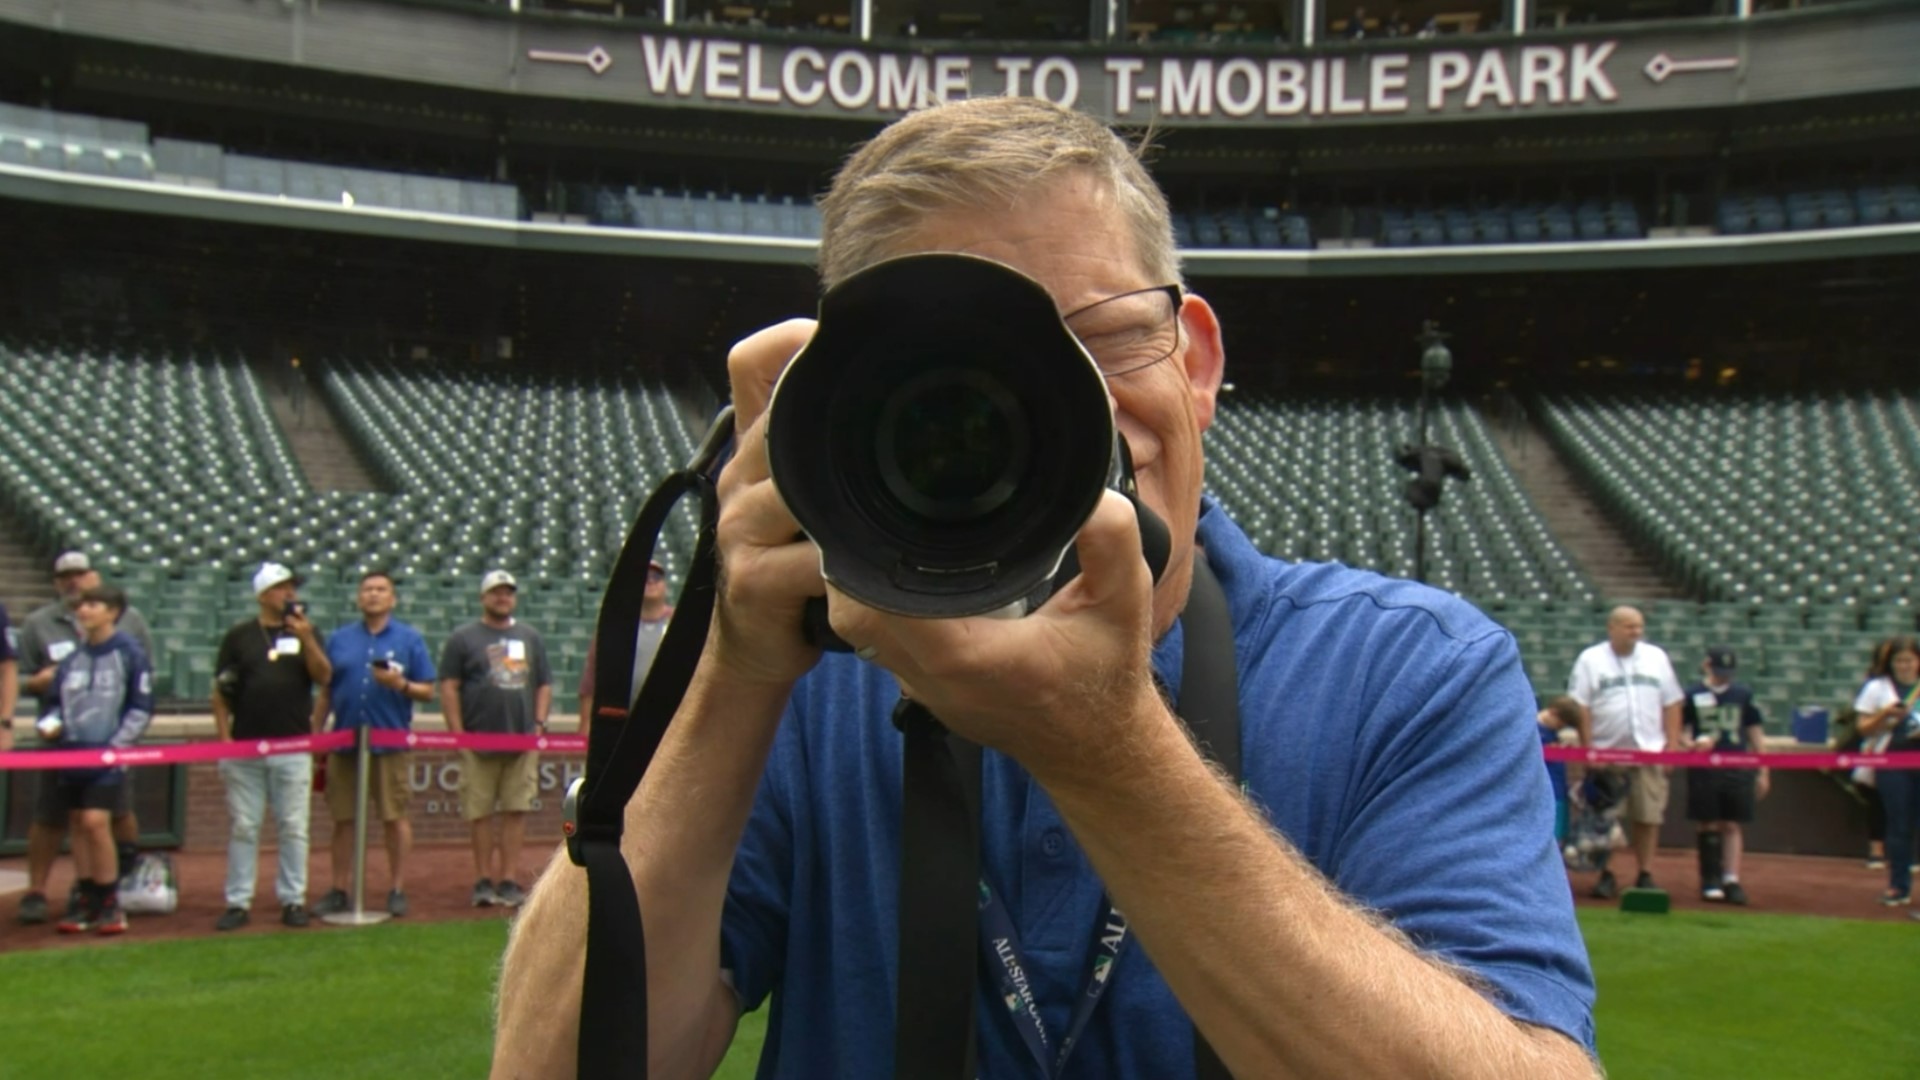 Get a behind the scenes look at a Seattle Mariners fireworks show